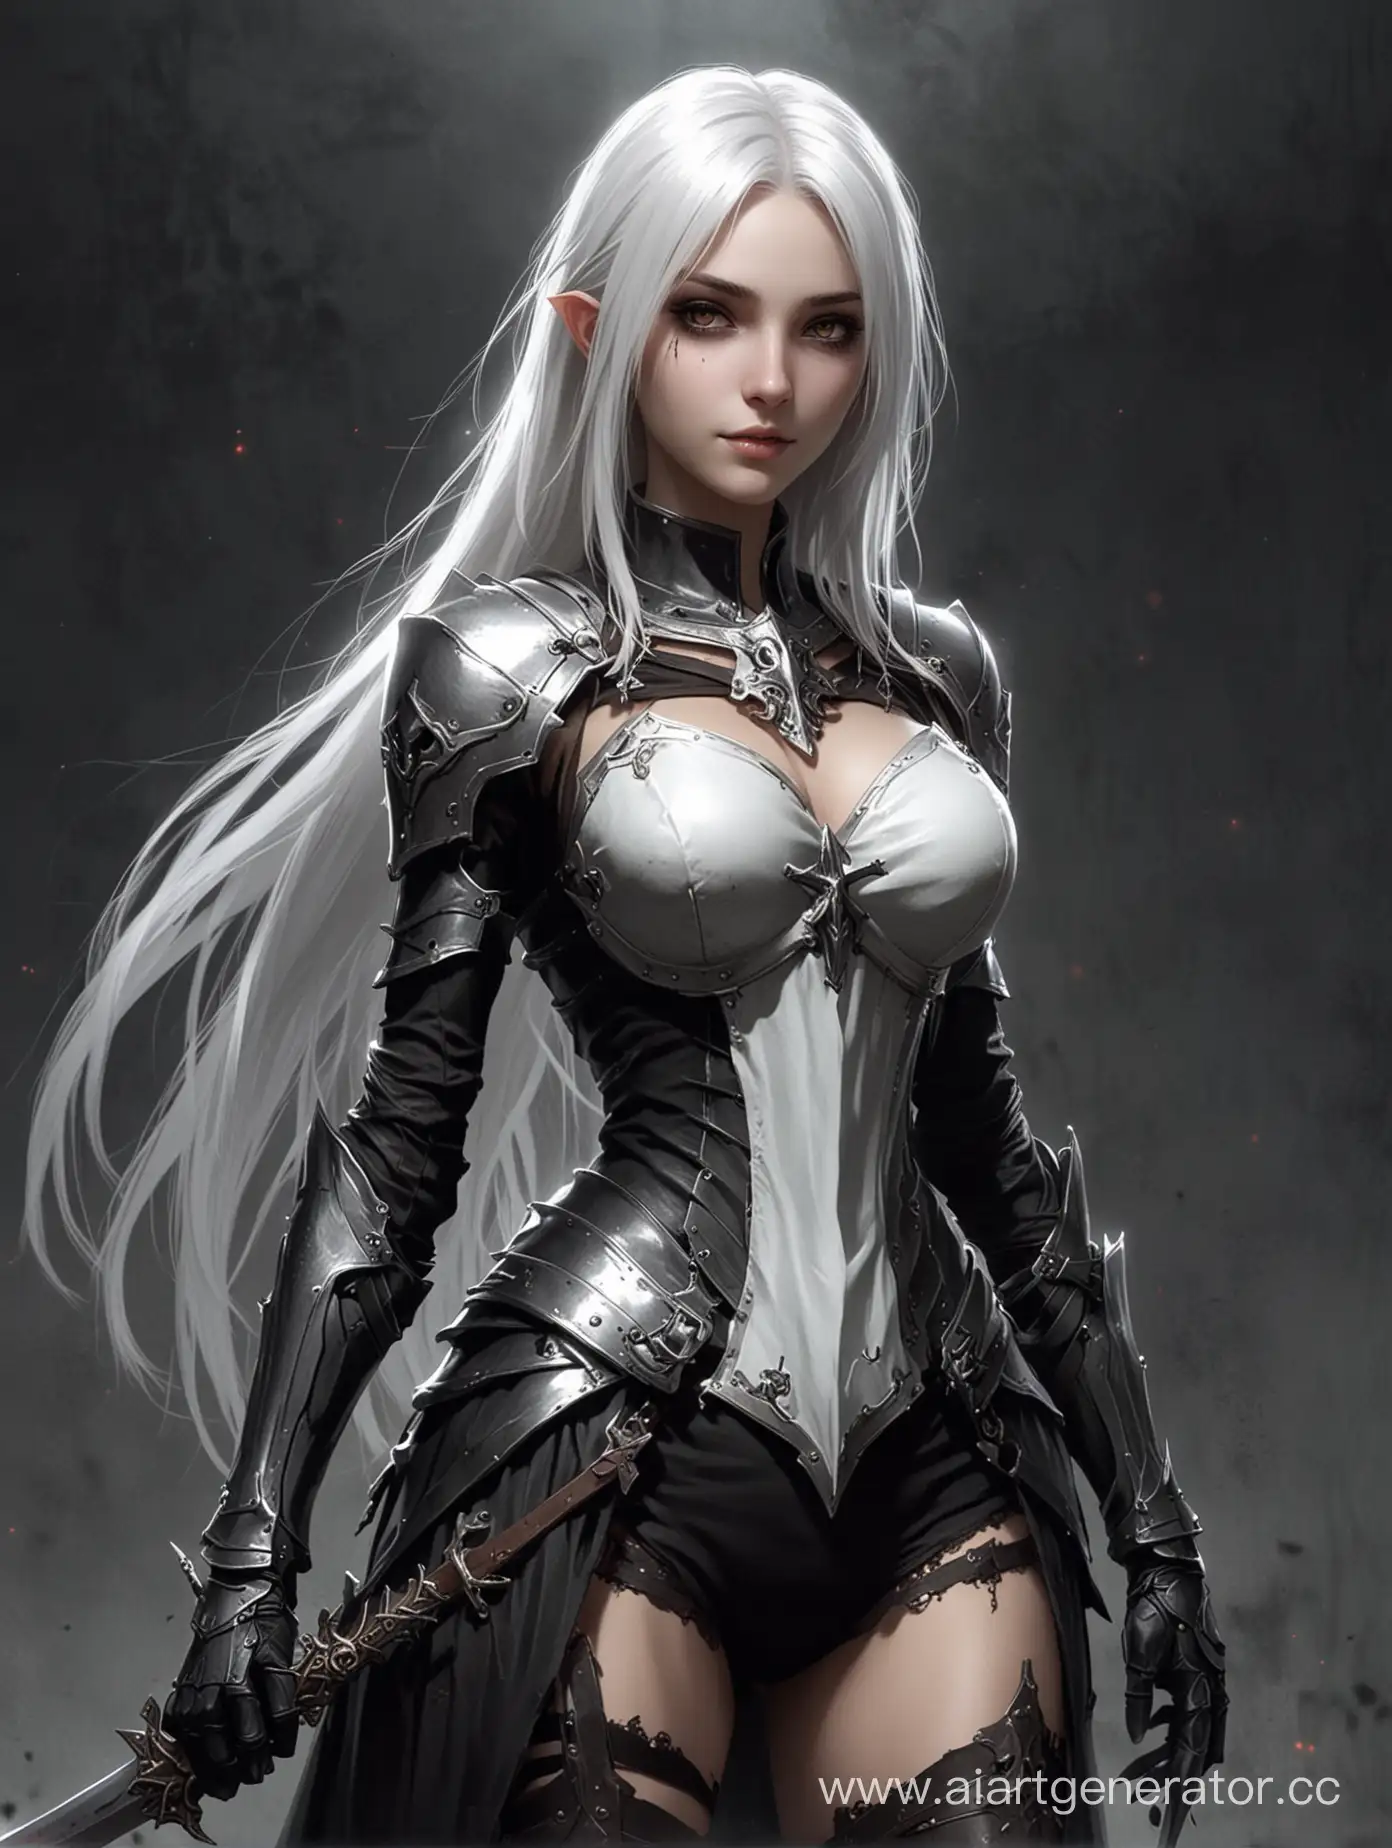 Slender-Girl-with-White-Hair-as-a-Necromancer-Knight